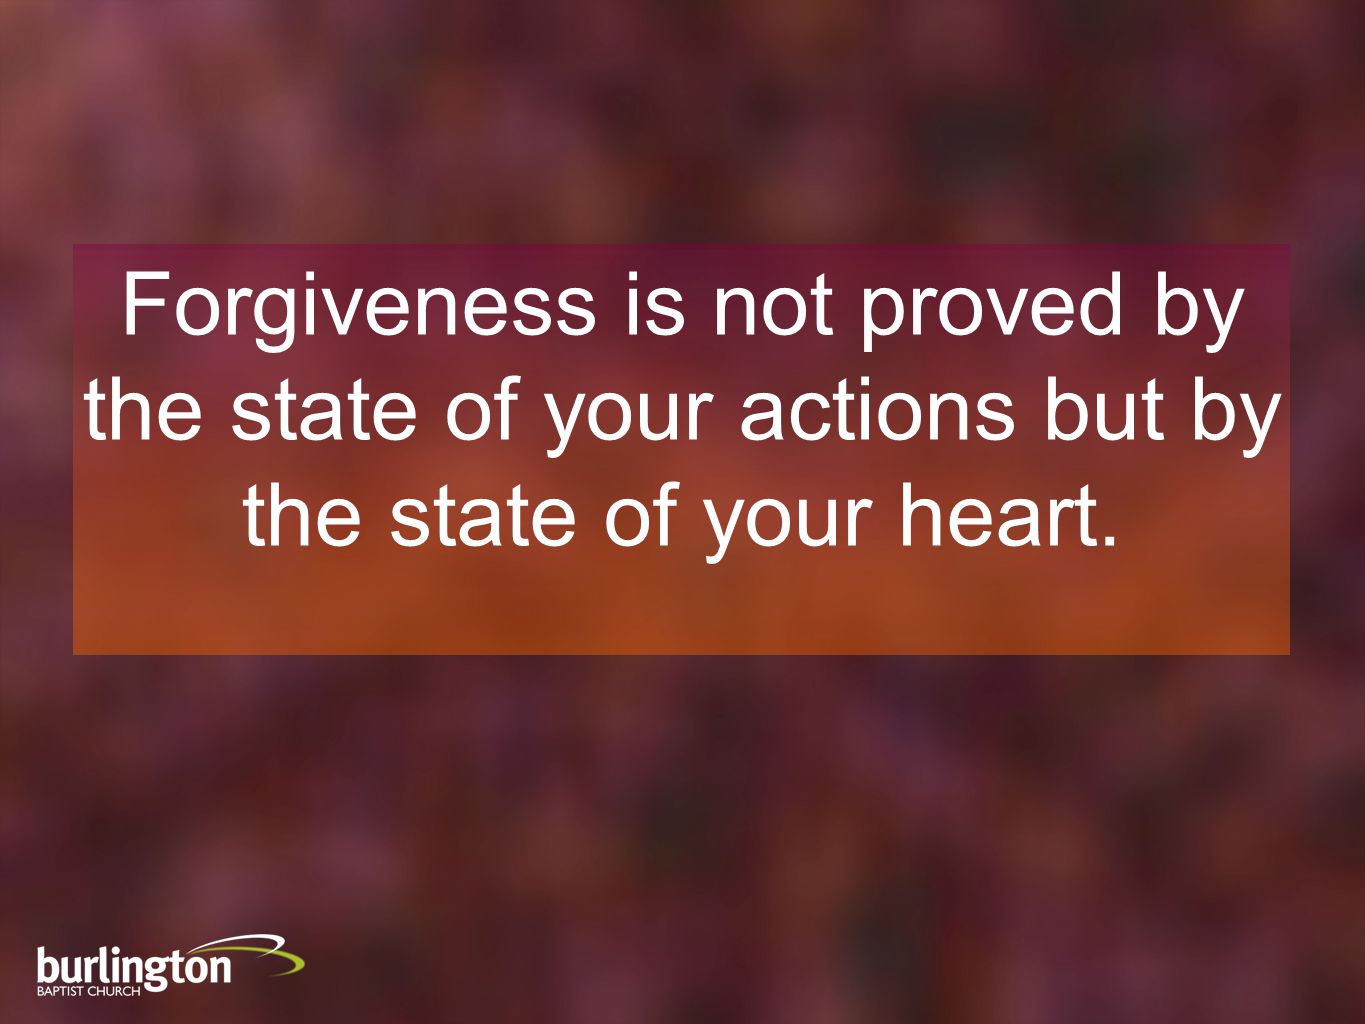 Forgiveness is not proved by the state of your actions but by the state of your heart.